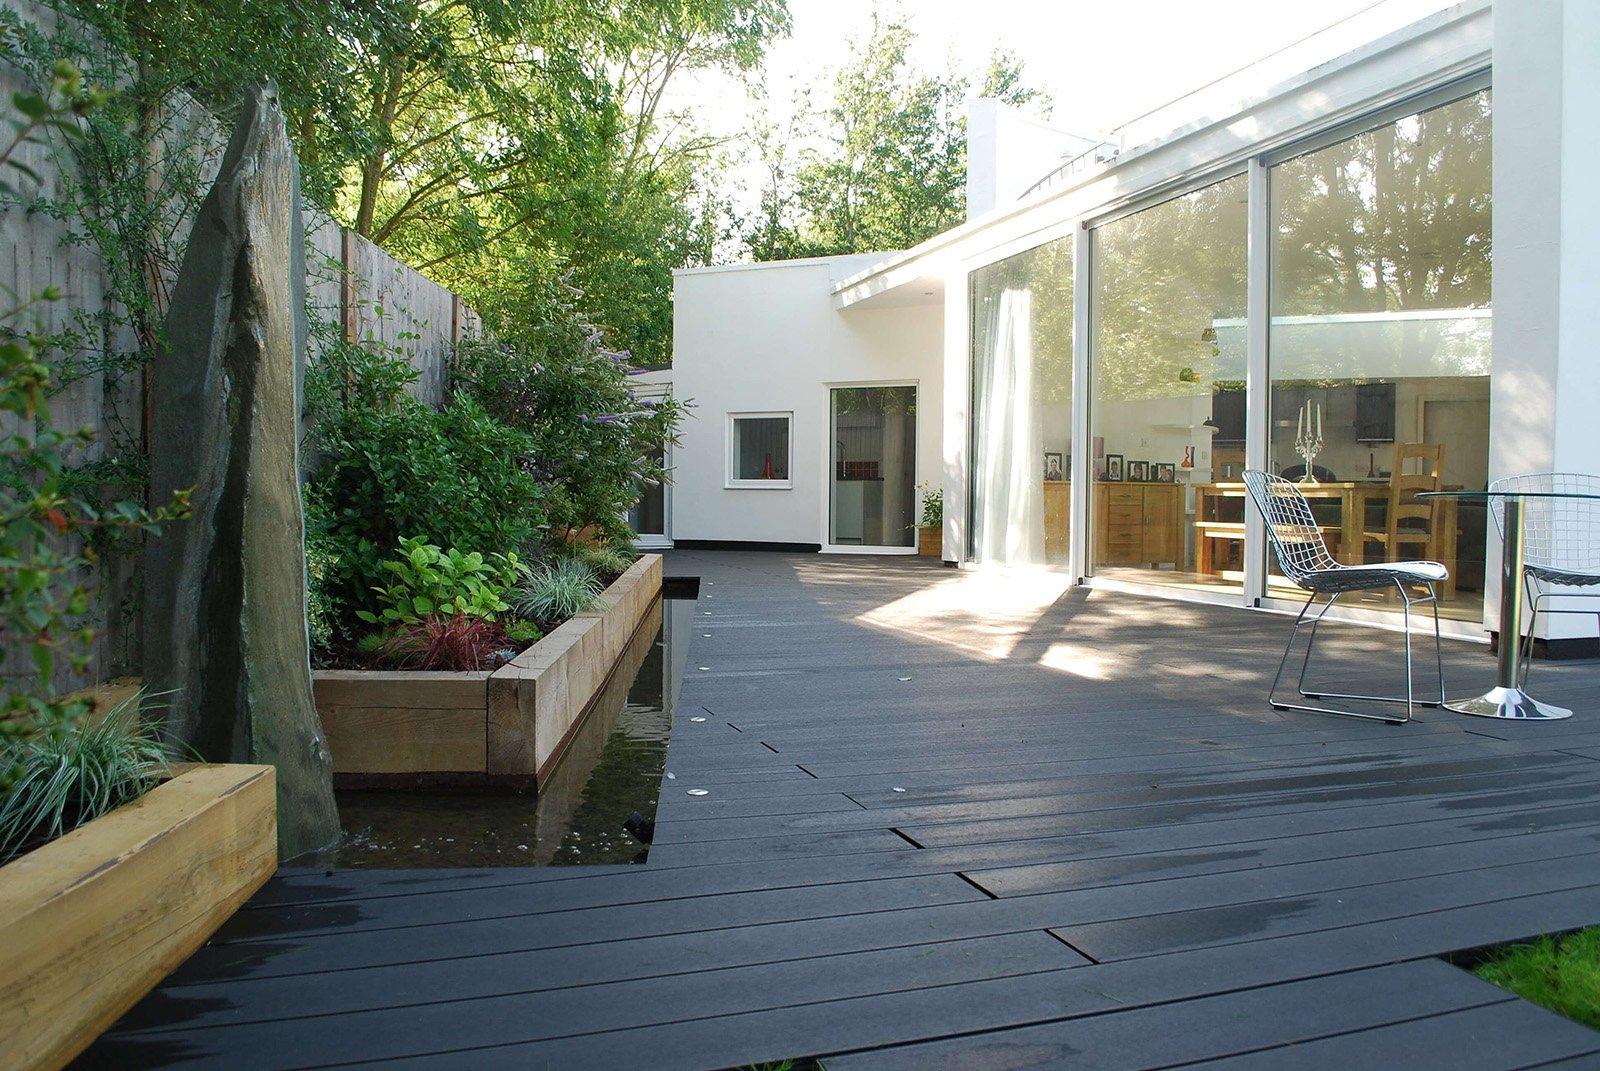 Cladco Composite Decking in Charcoal wraps around a beautiful home